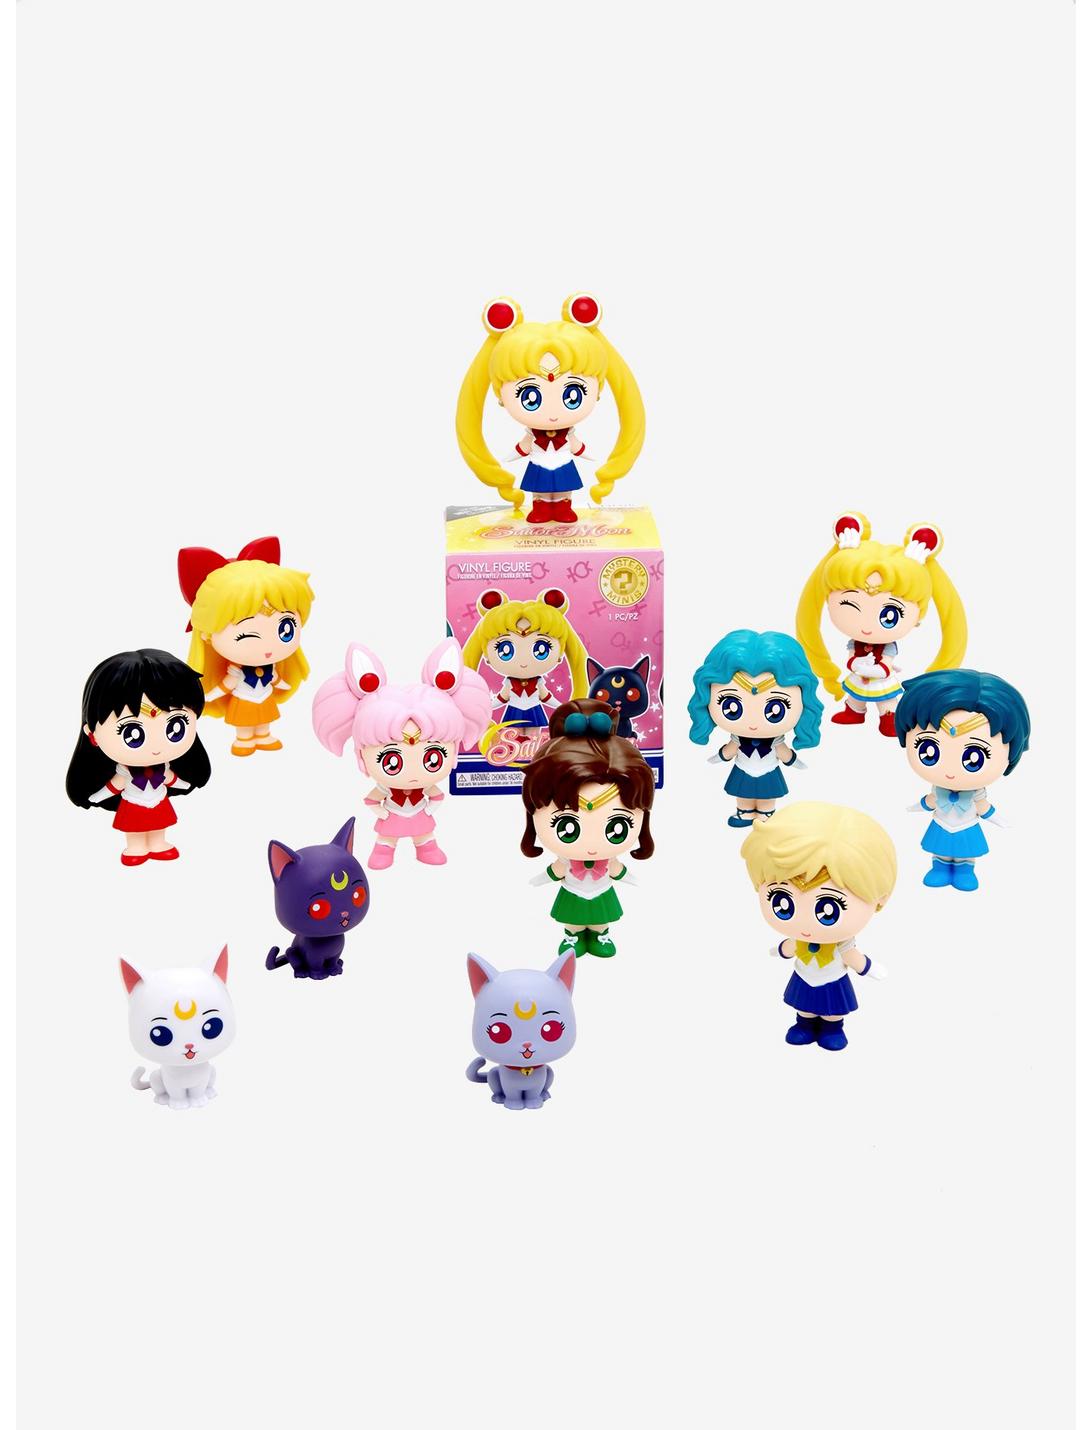 Anime Sailor Moon Funko Pops! - Hot Topic Exclusive Edition - Collectible  Figures 